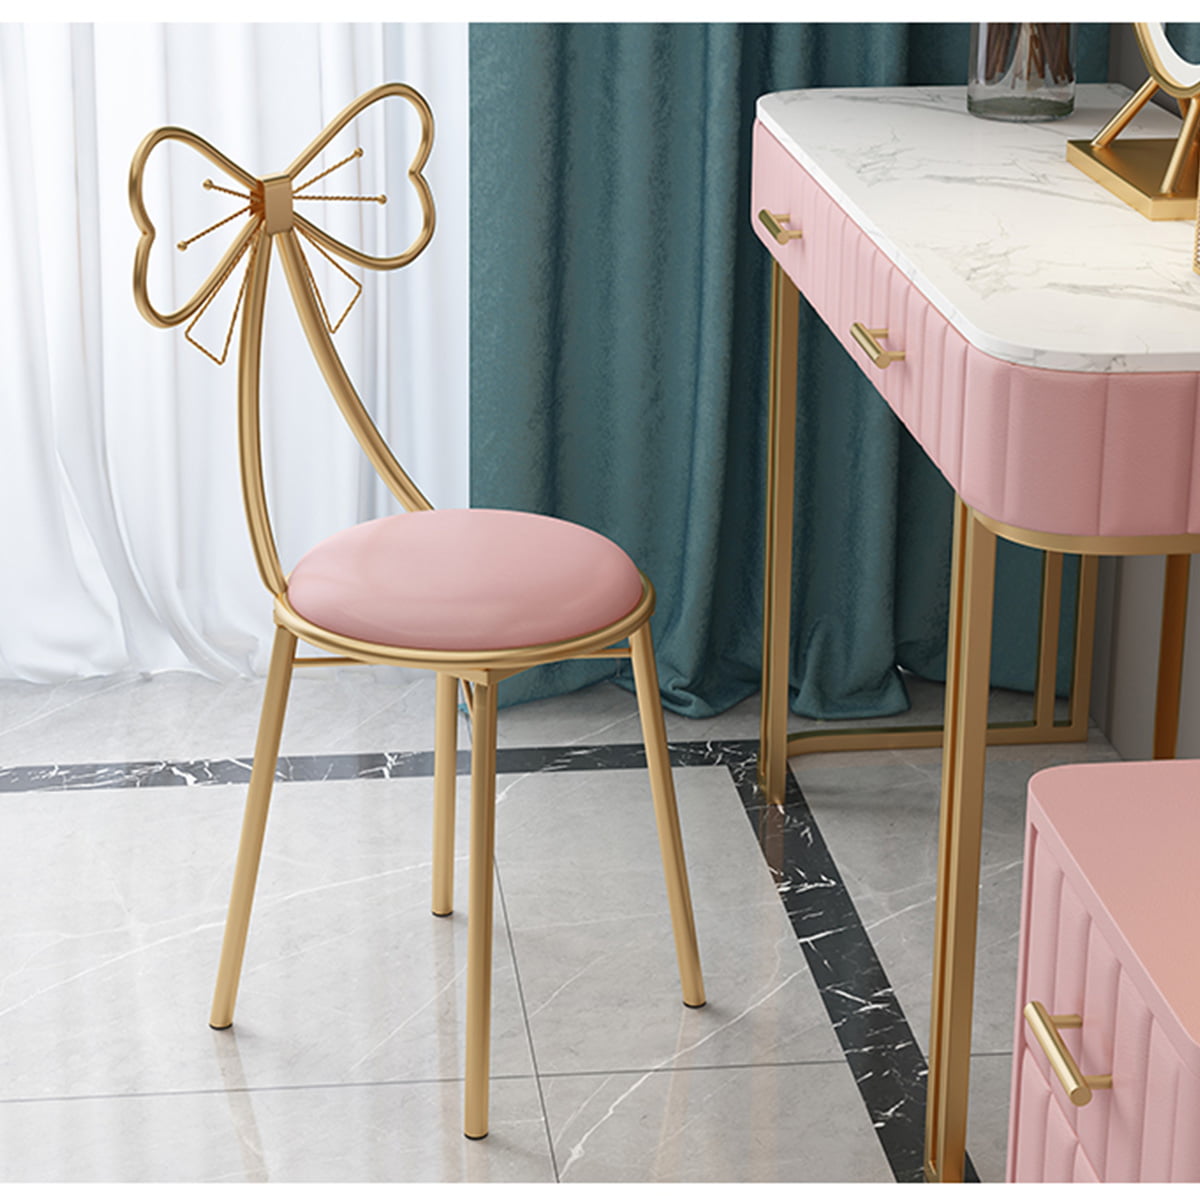 Makeup Artist Stool Dining Chairs, Vanity Bench For Bathroom